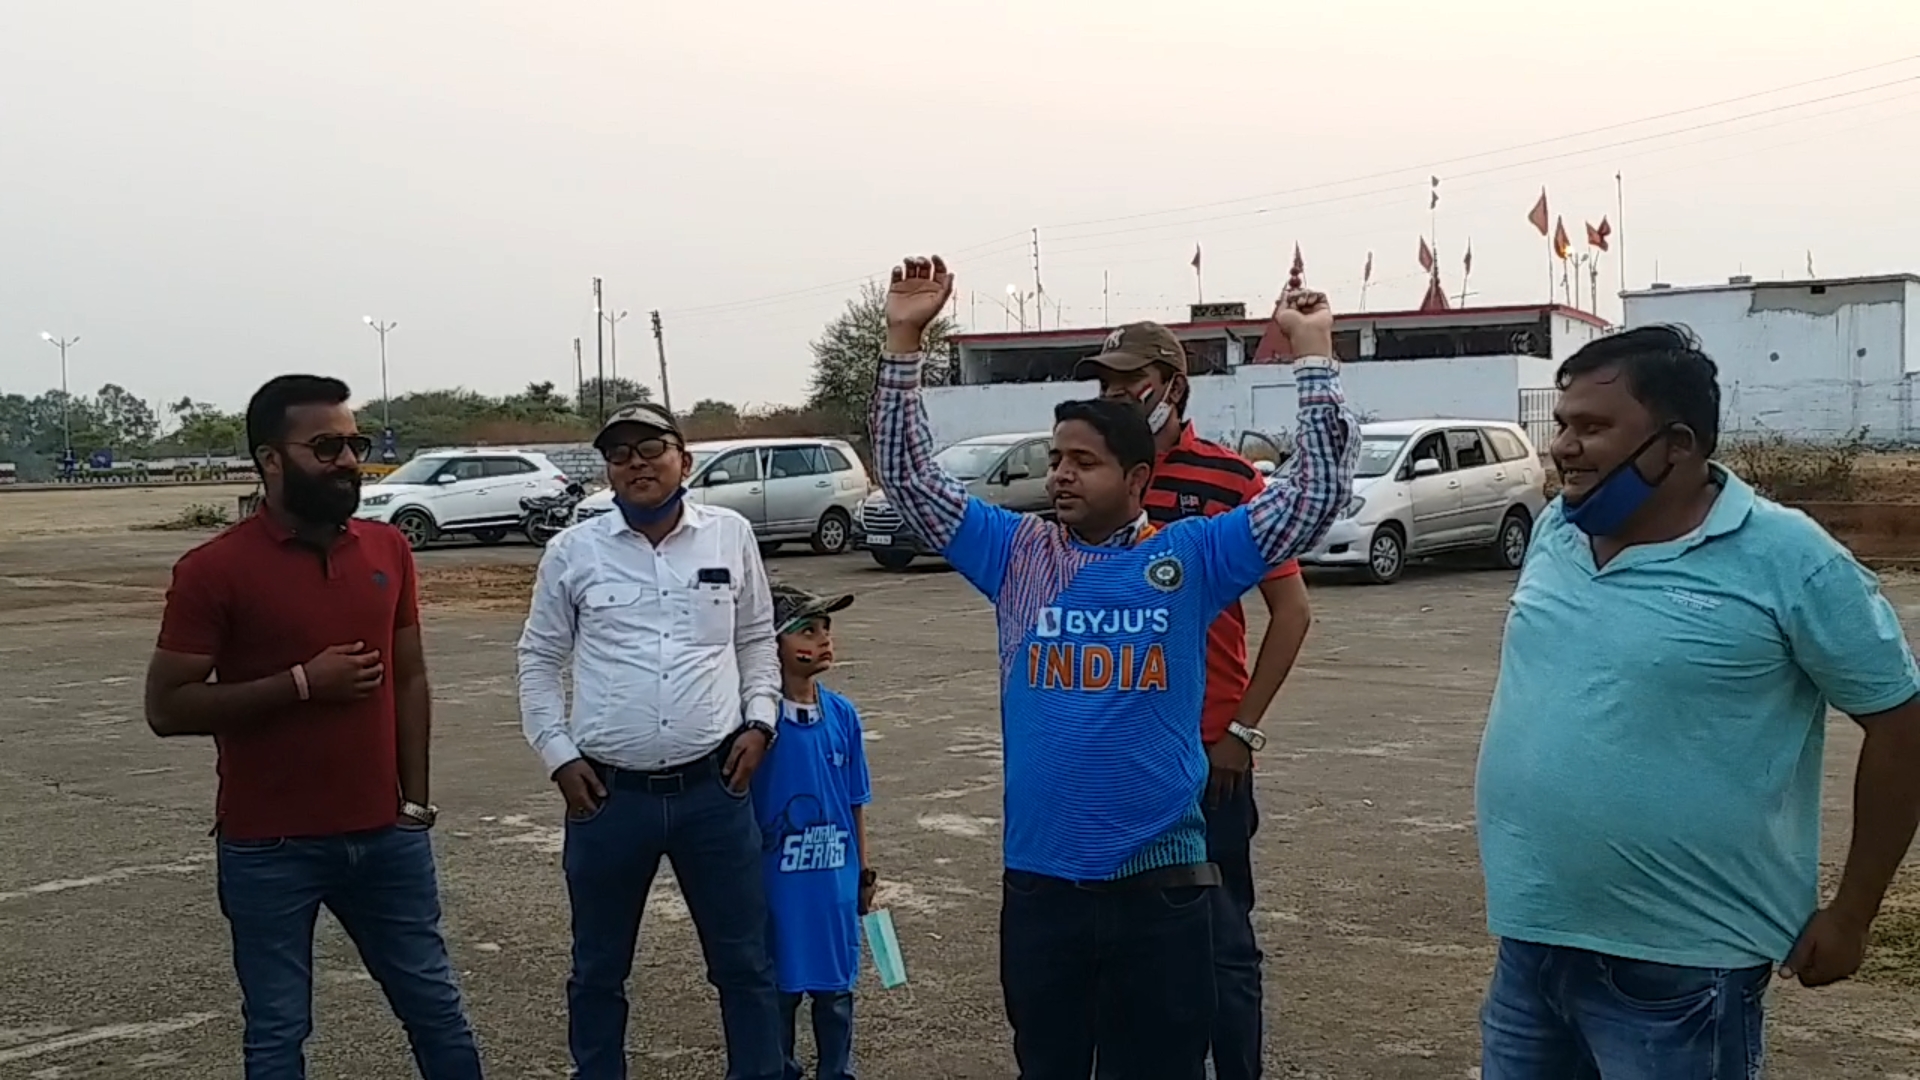 Low viewership and visitors at Road Safety World Series Cricket Tournament